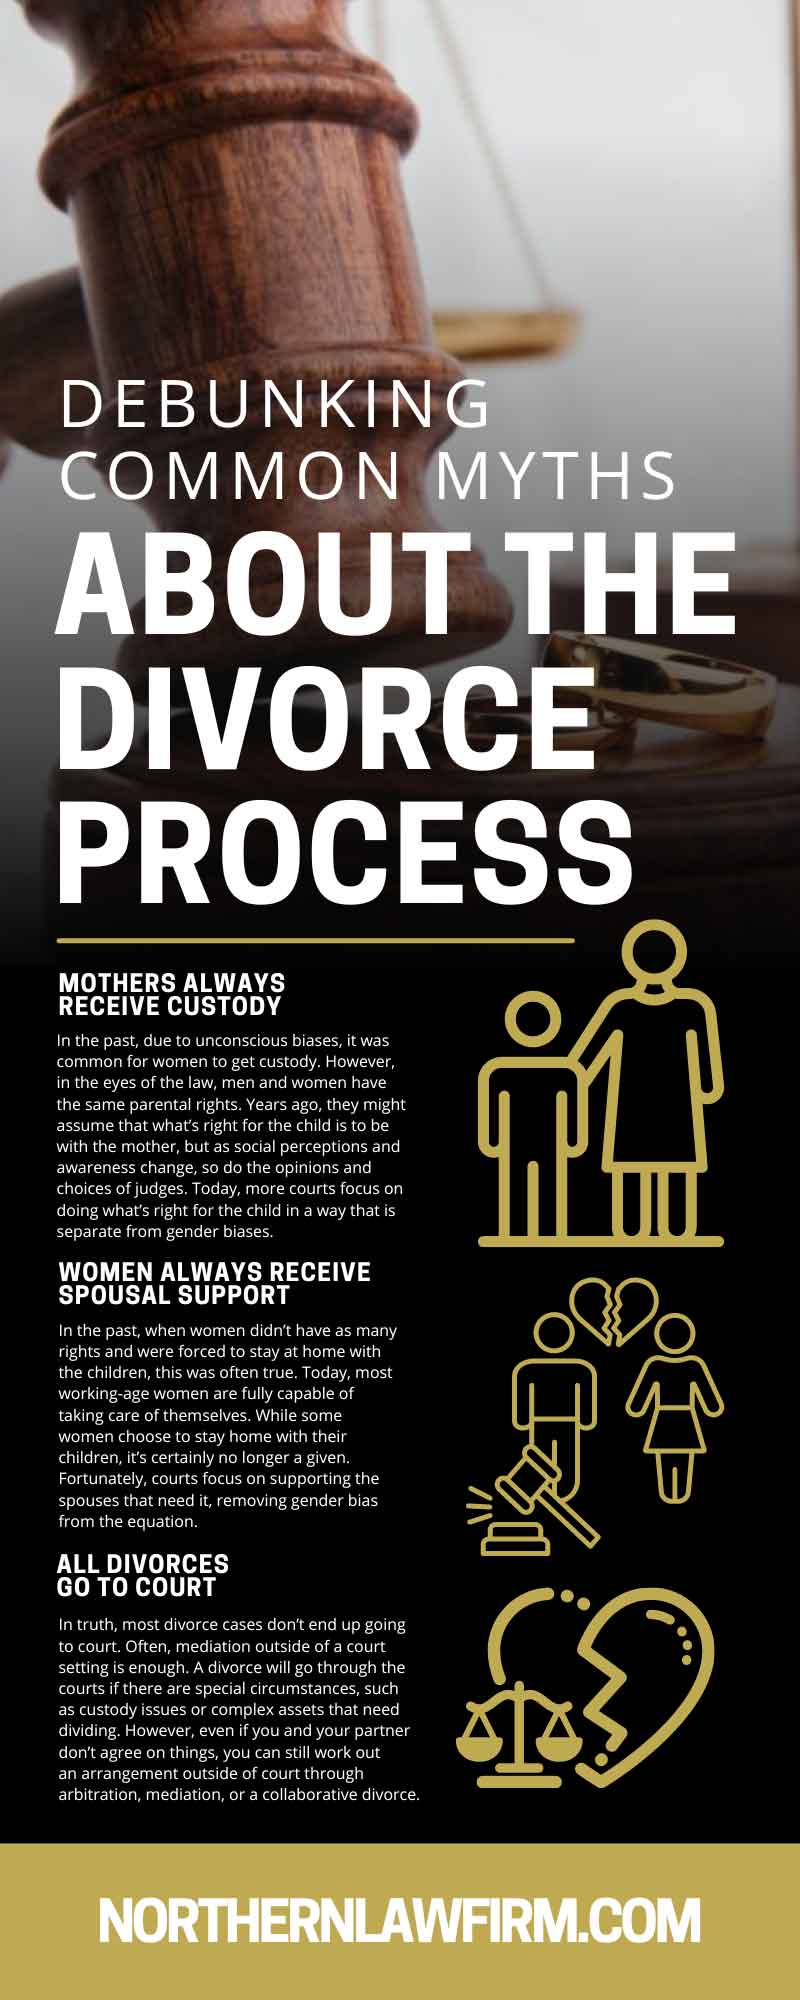 Debunking Common Myths About the Divorce Process